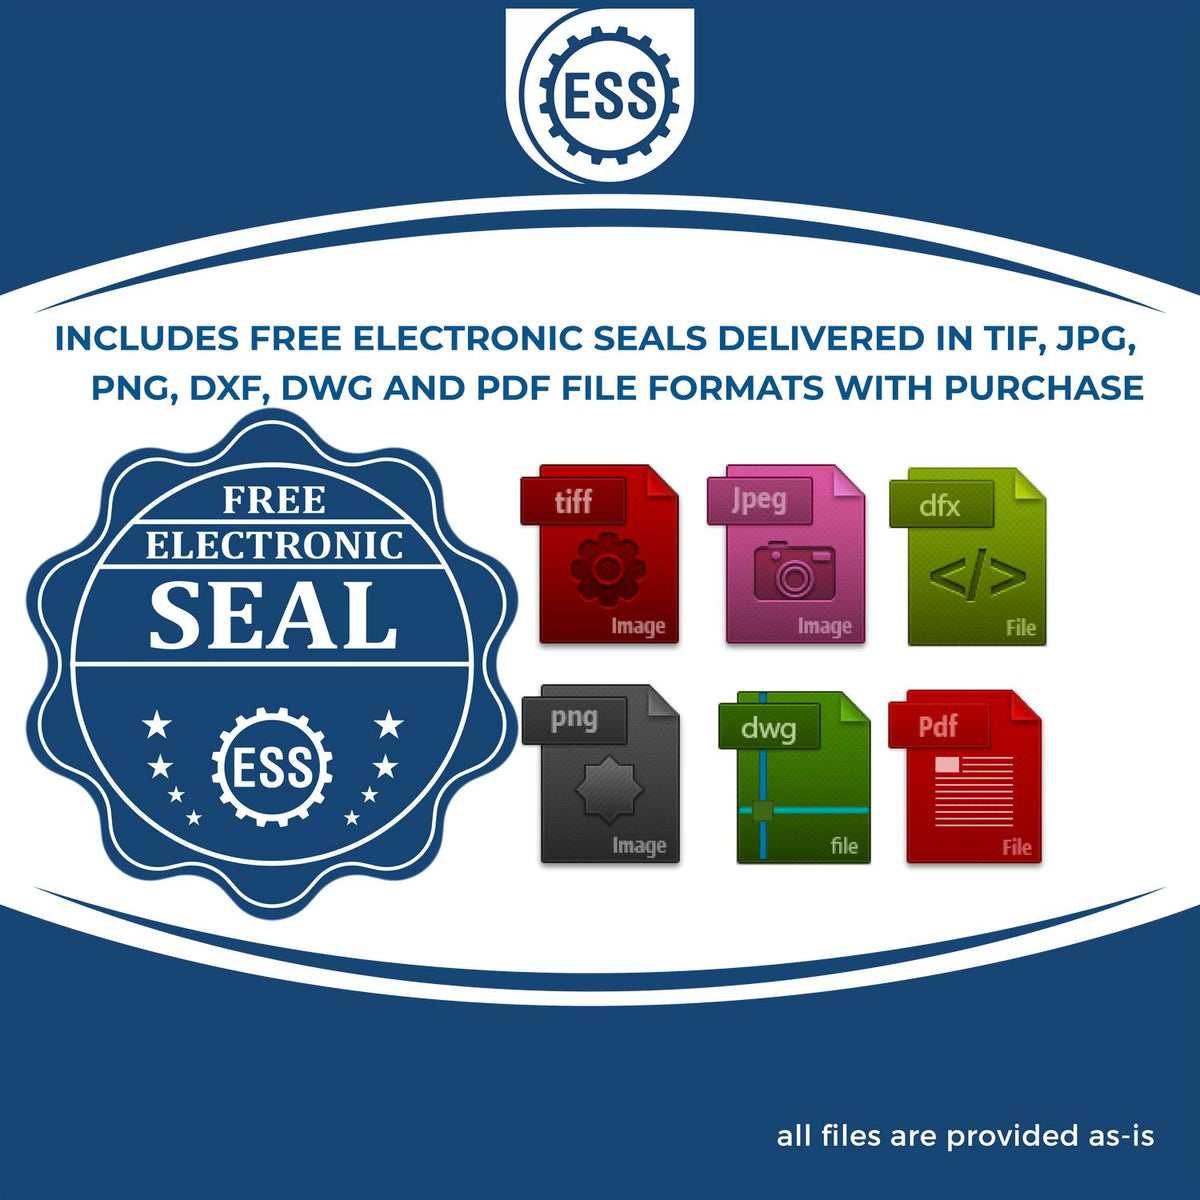 An infographic for the free electronic seal for the Heavy-Duty Idaho Rectangular Notary Stamp illustrating the different file type icons such as DXF, DWG, TIF, JPG and PNG.